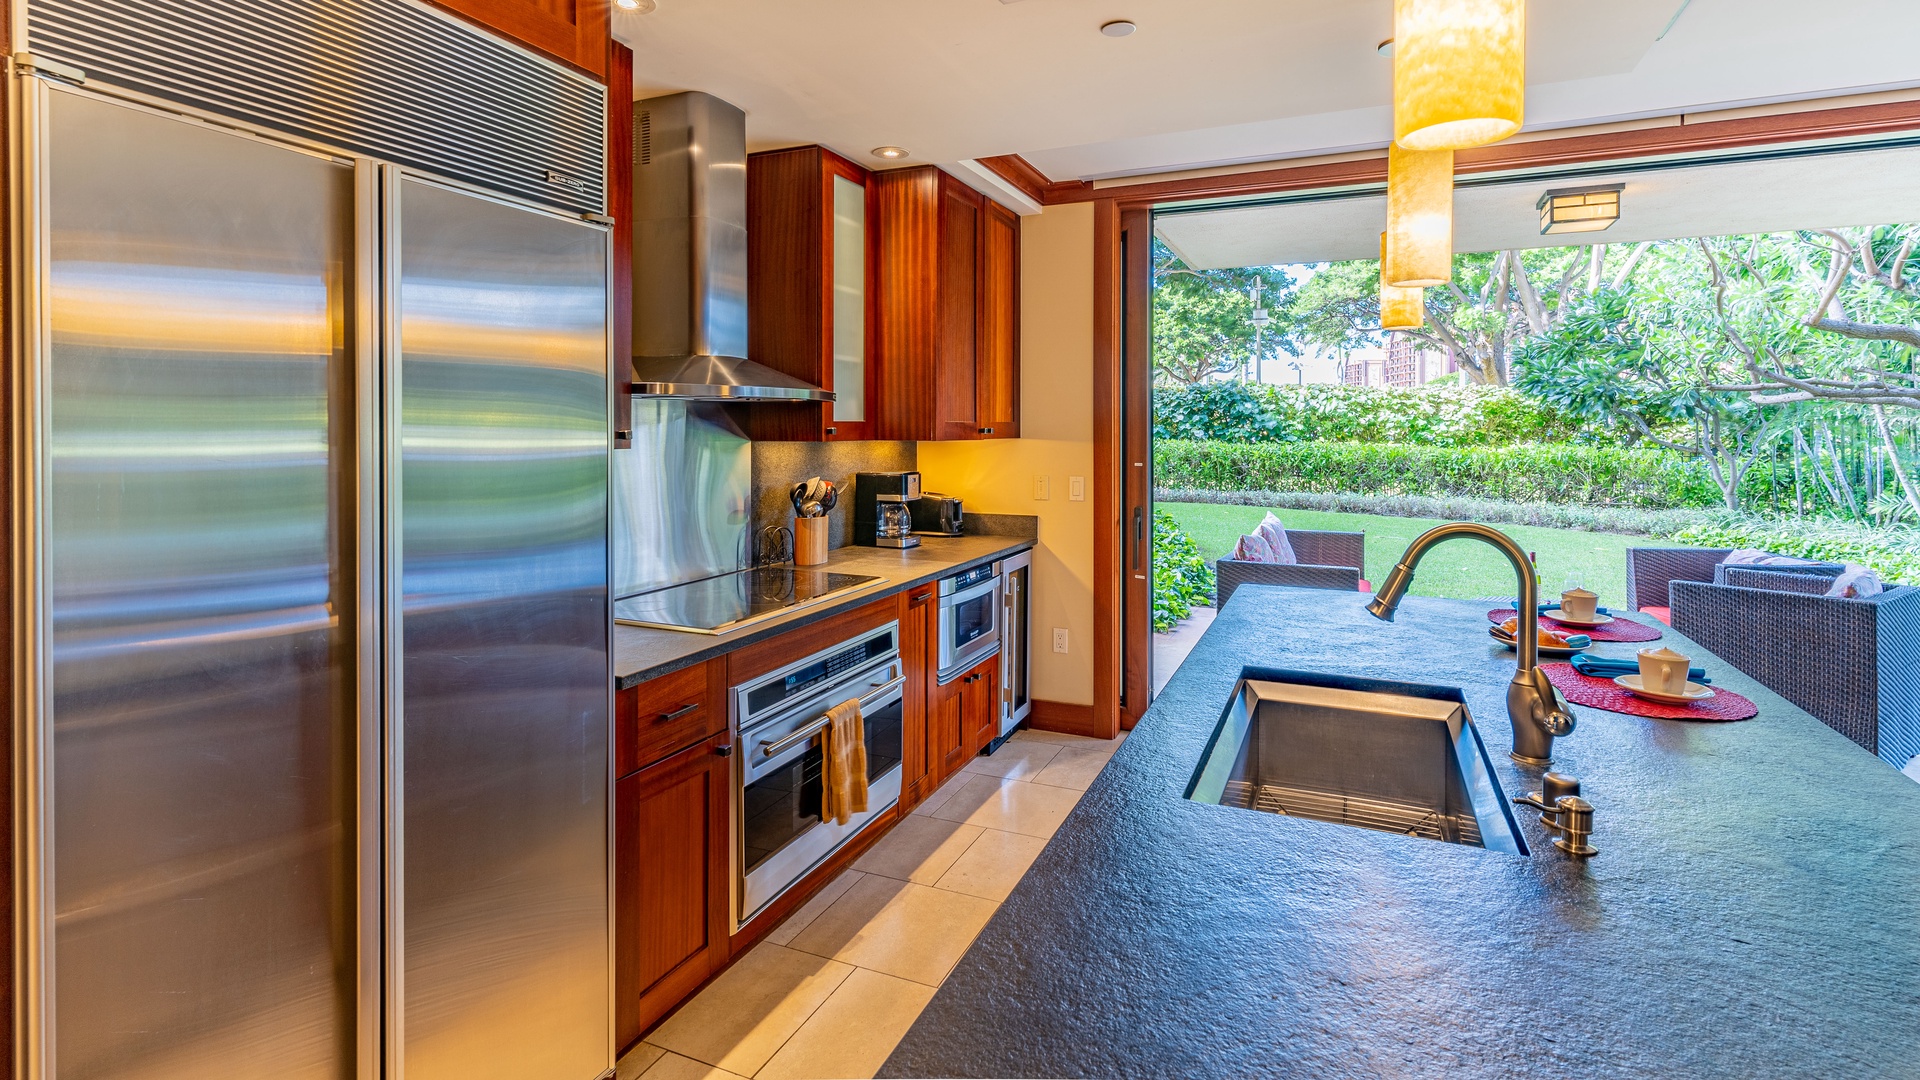 Kapolei Vacation Rentals, Ko Olina Beach Villas B102 - The kitchen is every chef's dream with stainless steel appliances and ocean breezes from the lanai.